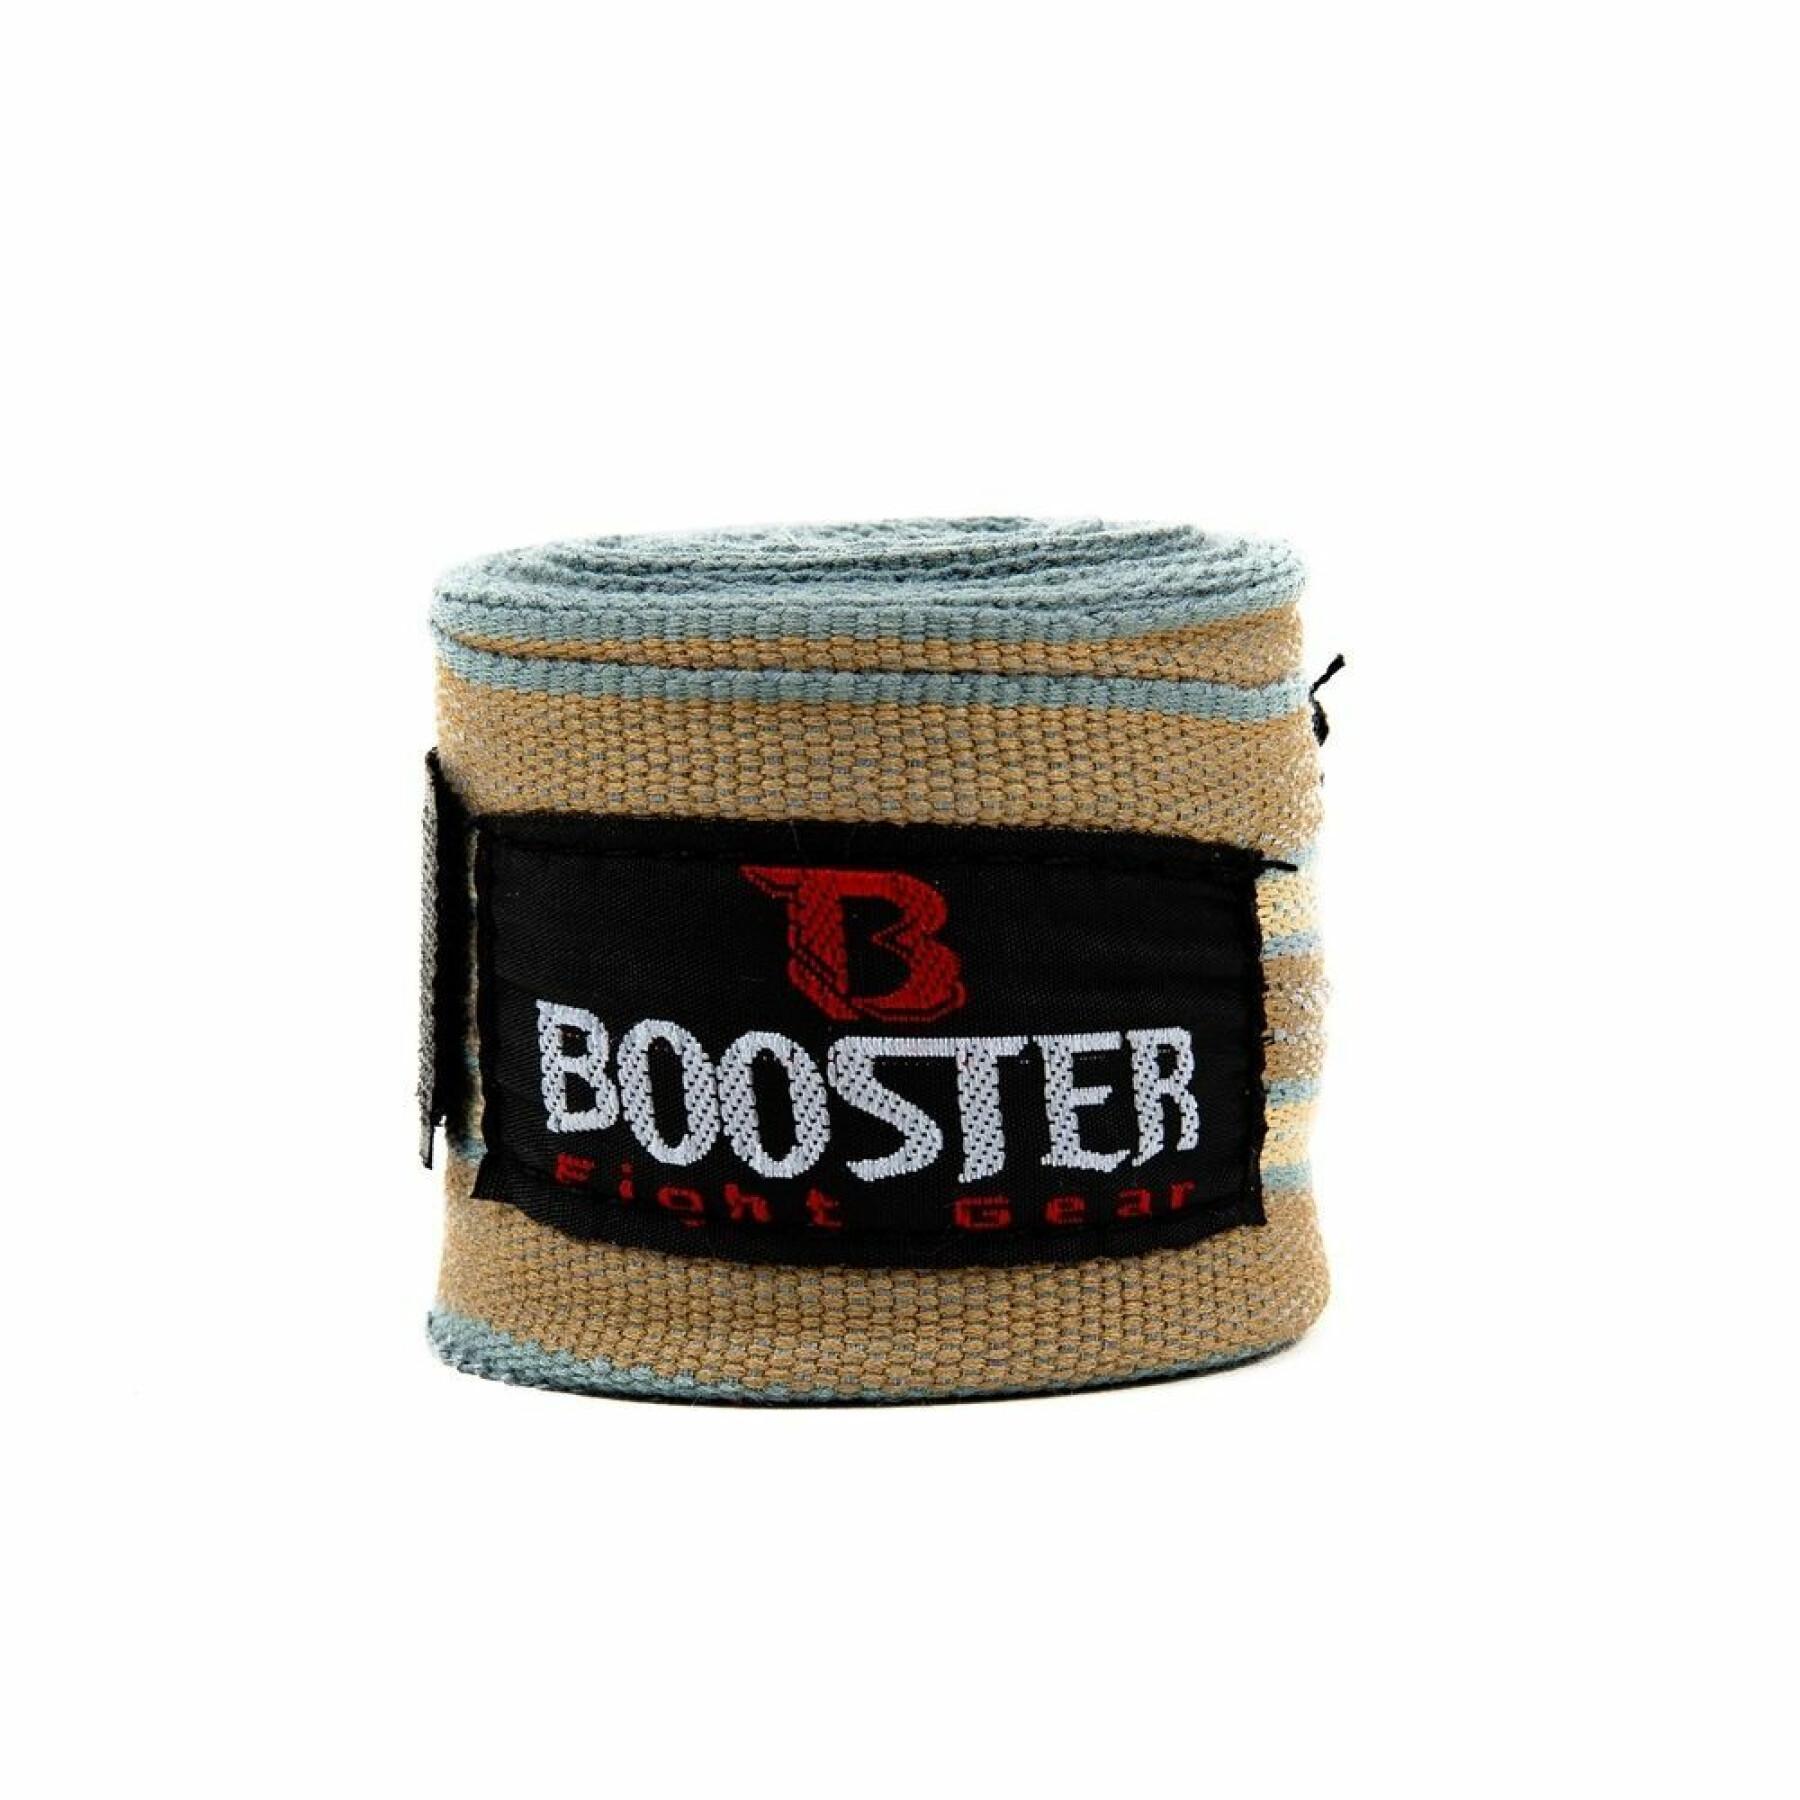 Boxing Bands Booster Fight Gear Bpc Retro 4